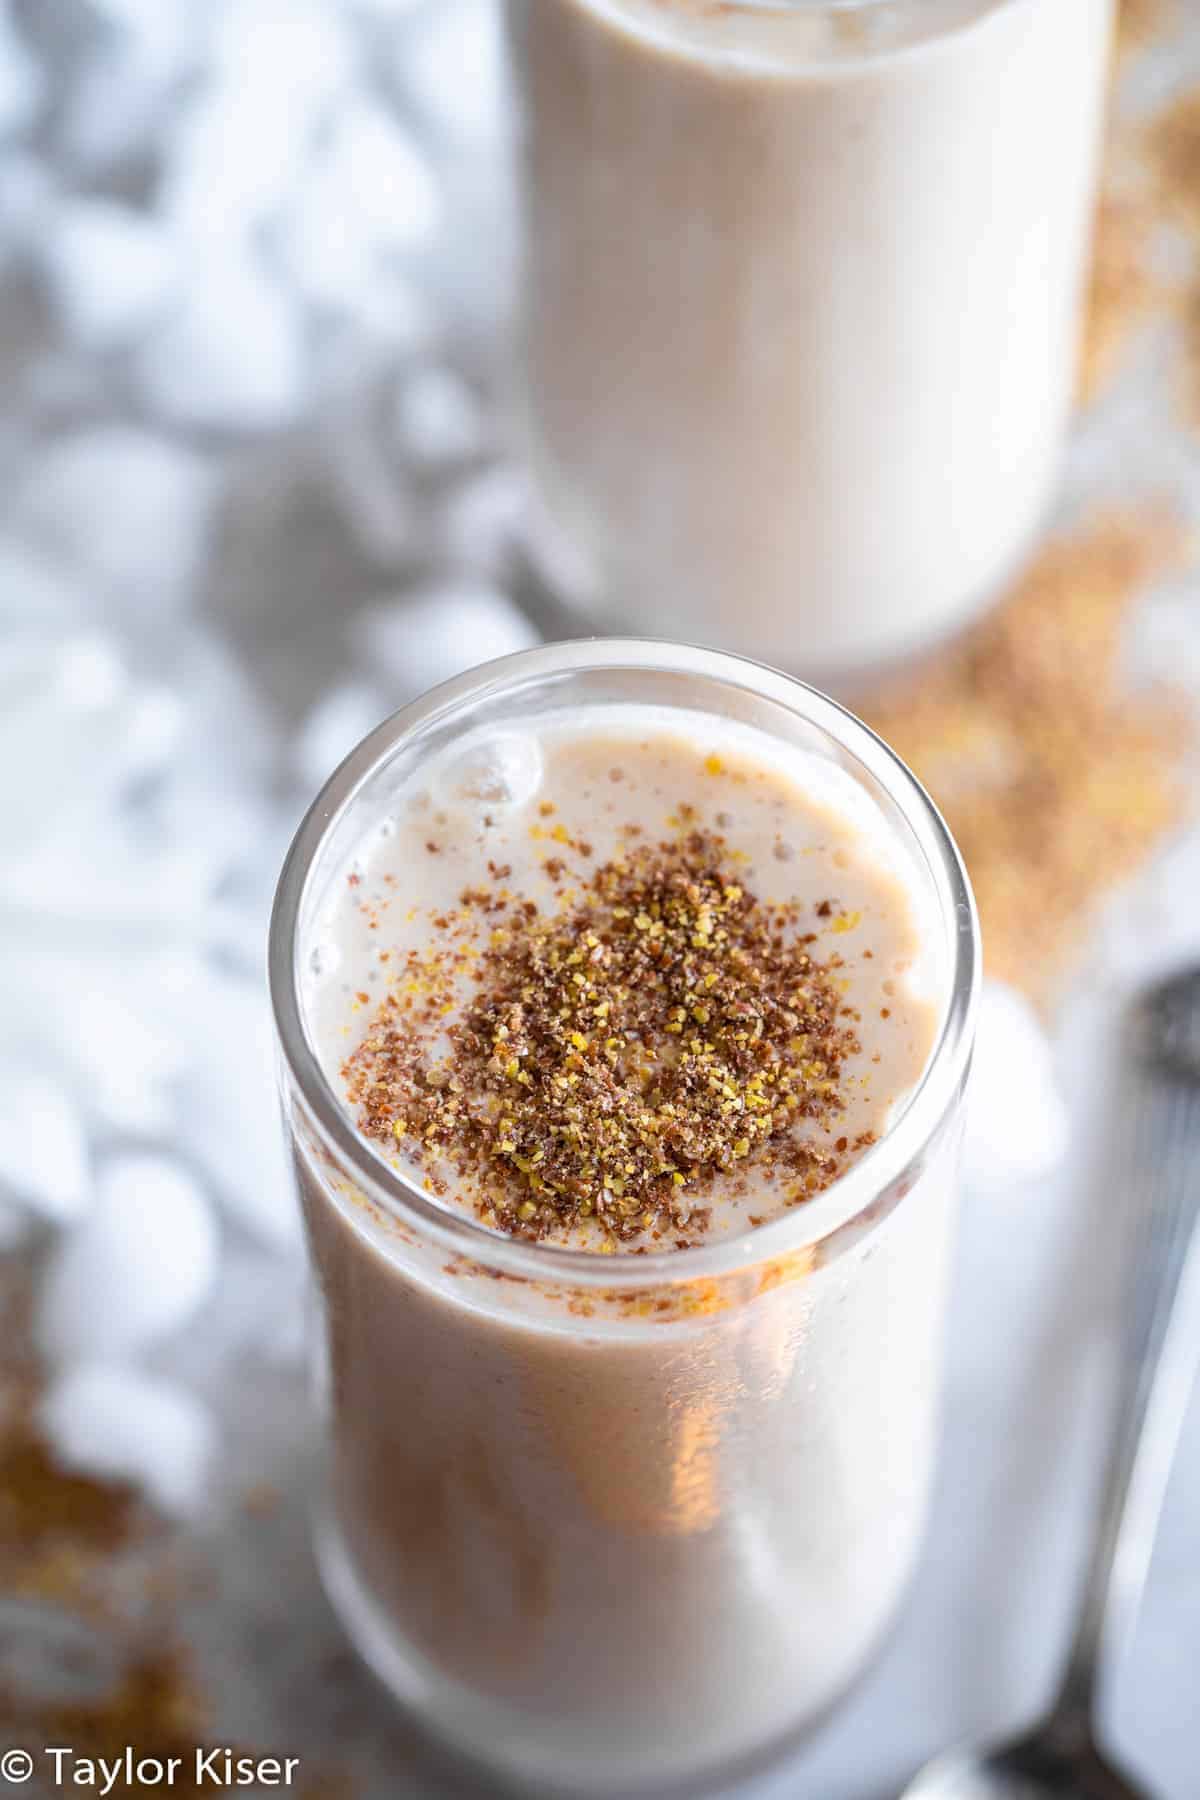 Banana Flaxseed Smoothie with flax seeds sprinkled on top